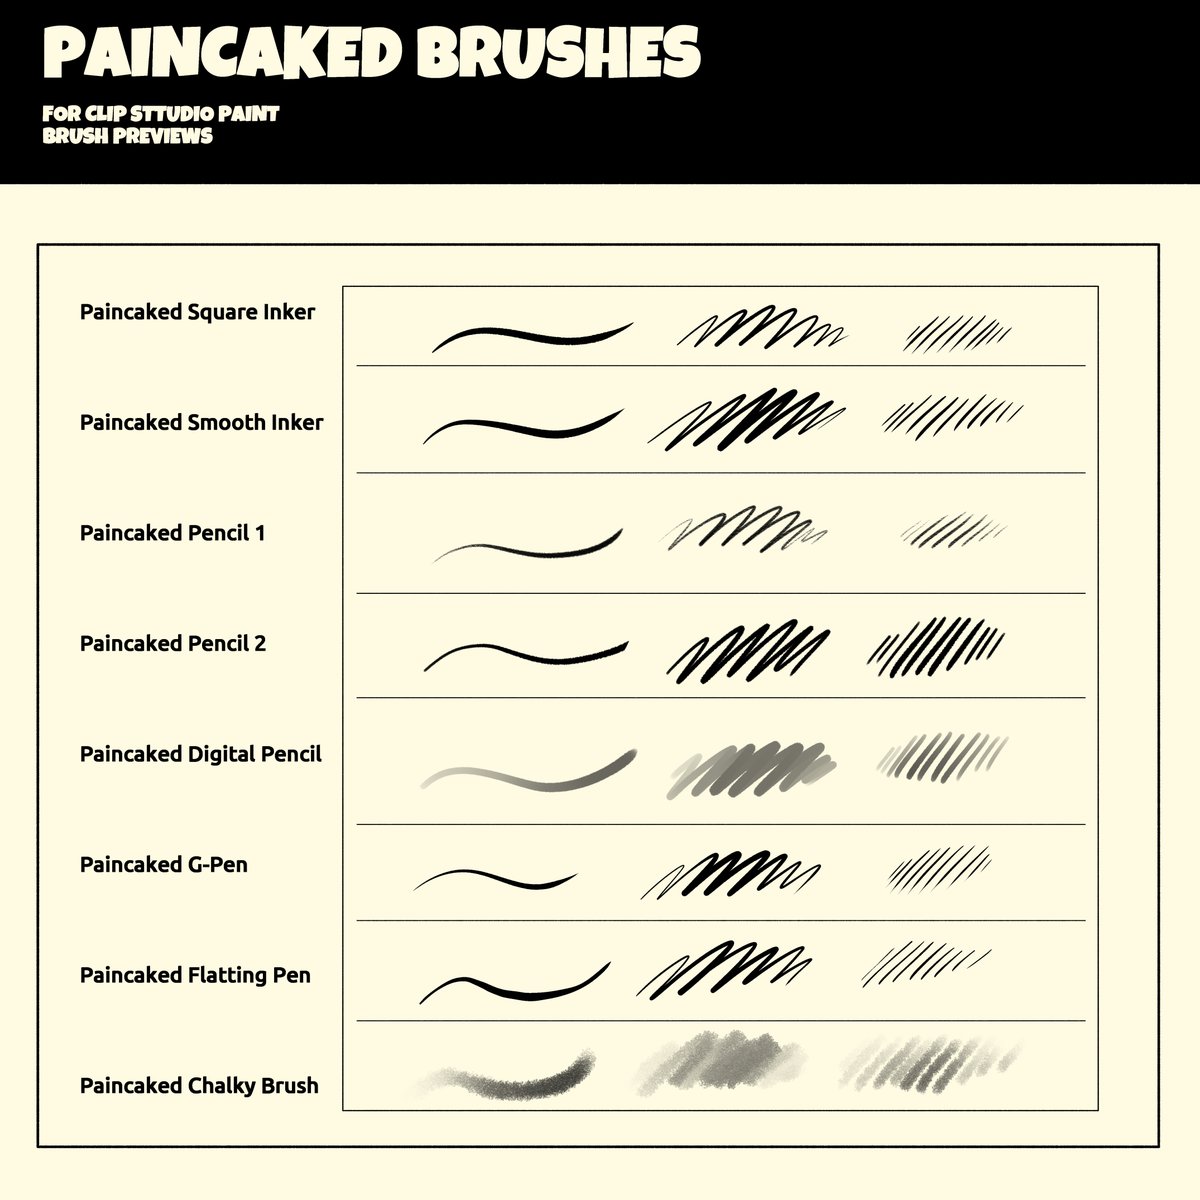 Hey everyone! I have finally gotten around to updating my Clip Studio Paint brush pack, and it's up for purchase on itch for $3! It contains the 8 brushes shown here, as well as a bonus Kit Plush brush for all you Plush Kit fans out there! Enjoy! paincaked.itch.io/brush-pack-2022